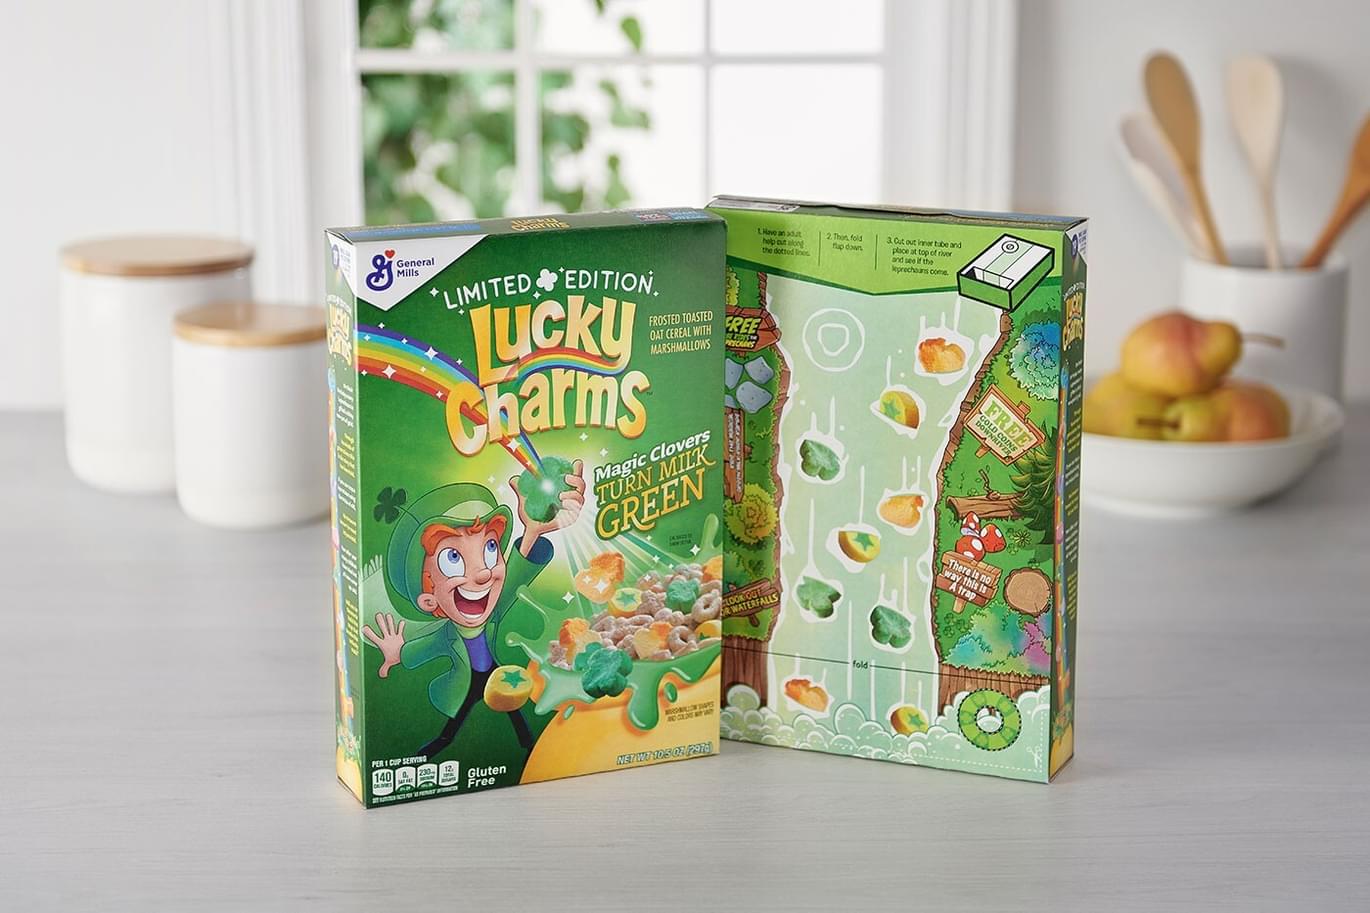 Lucky charm cereal box